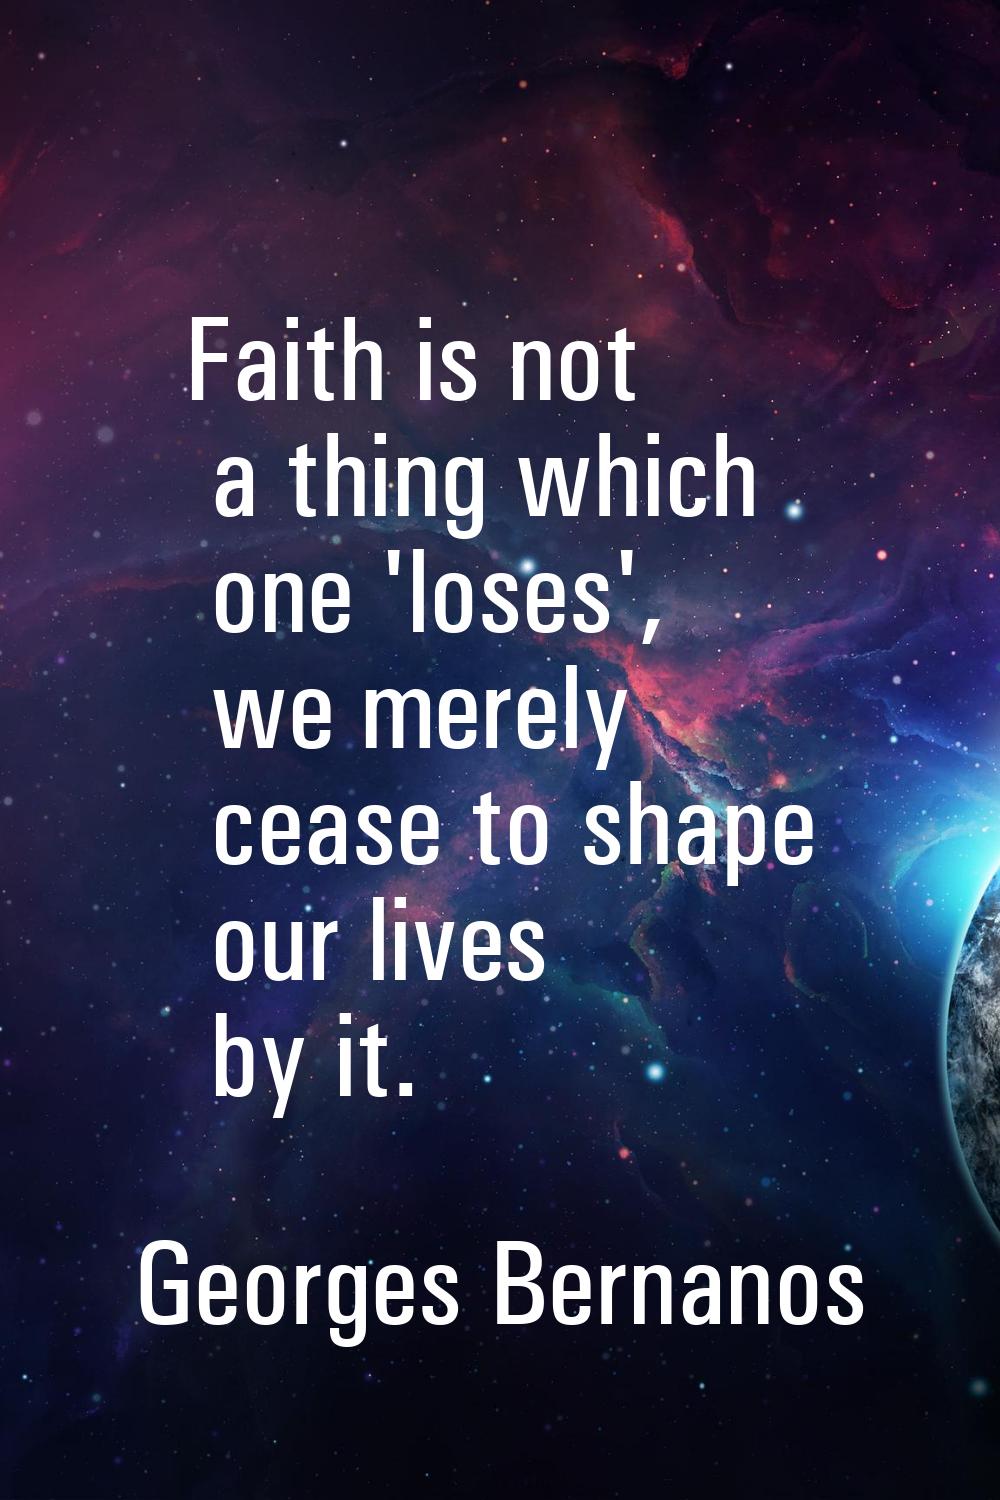 Faith is not a thing which one 'loses', we merely cease to shape our lives by it.